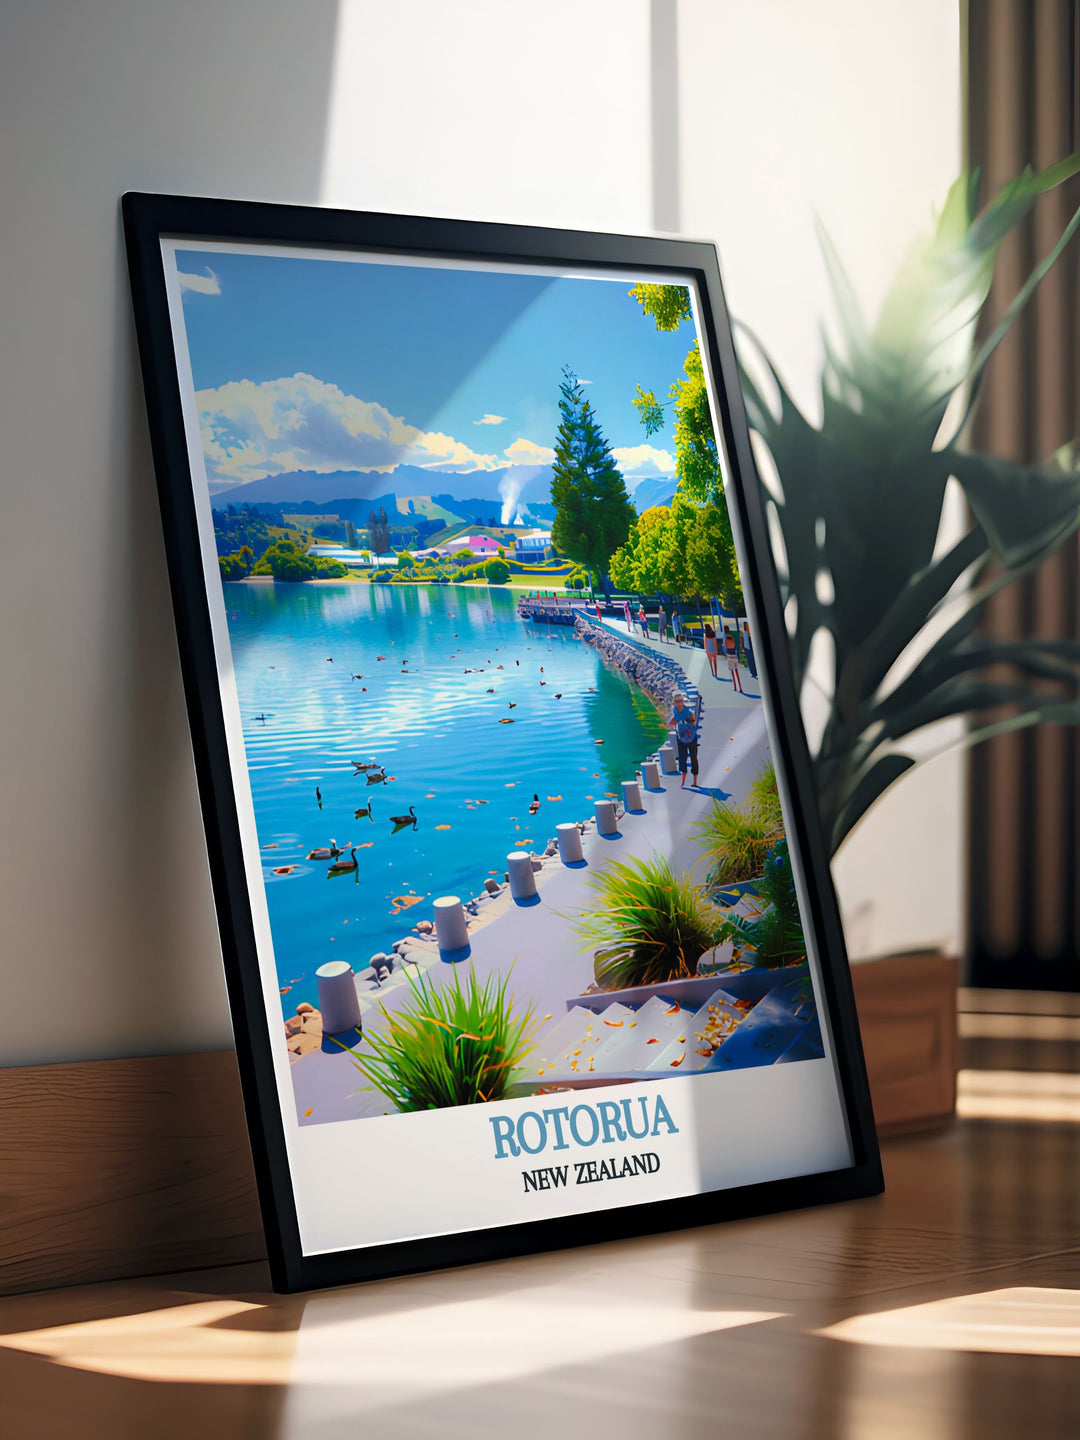 Unique Lake Rotorua artwork capturing the essence of Rotorua New Zealand. Perfect for home decor and as a special gift. This print will add a touch of elegance and tranquility to any room with its stunning depiction of Lake Rotorua.